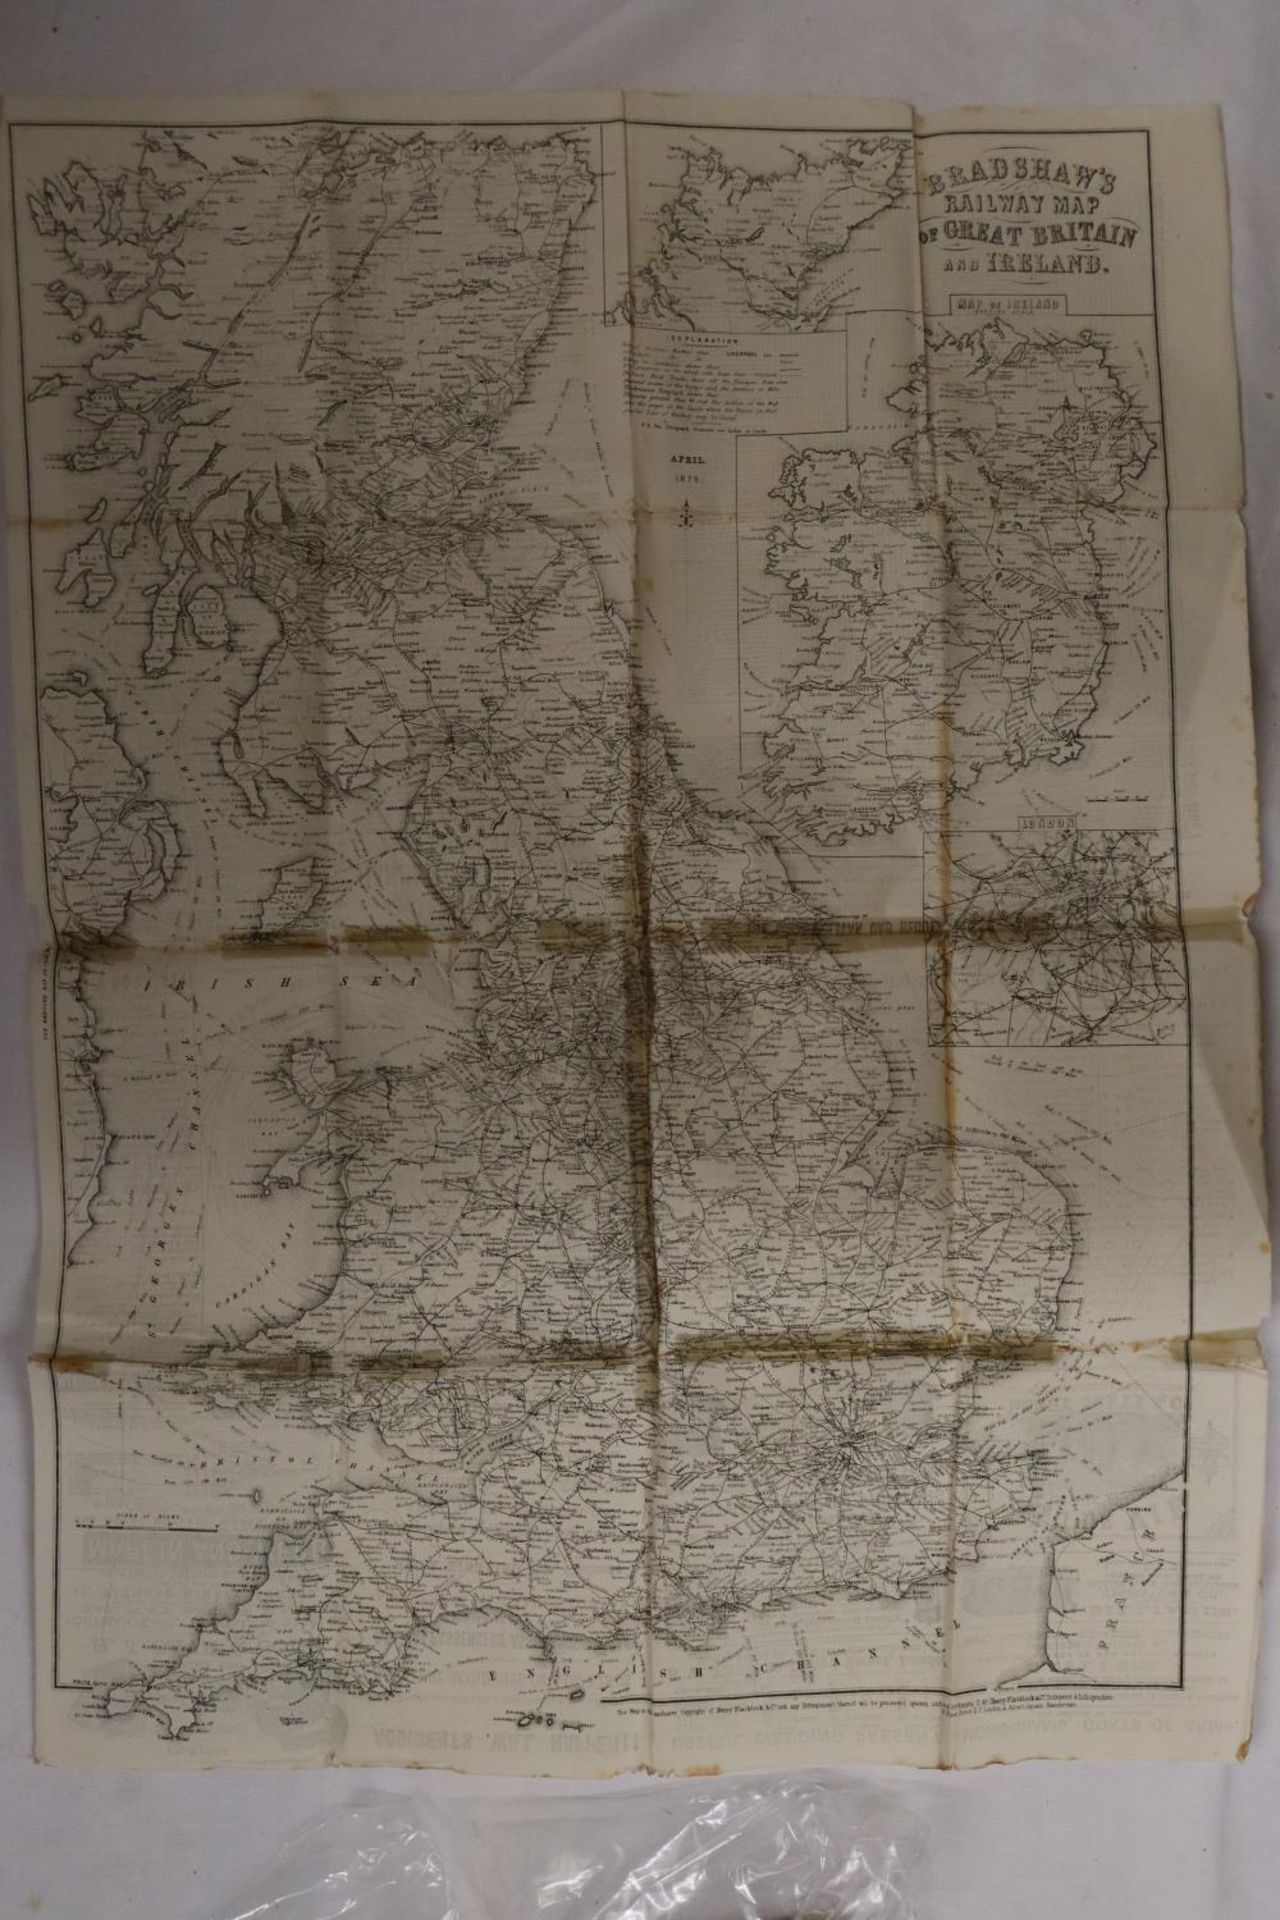 A BRADSHAWS MONTHLY RAILWAY GUIDE DATED FEBRUARY 1845, PAPERBACK VERSION AND A FOLD OUT RAILWAY MAP - Image 4 of 4